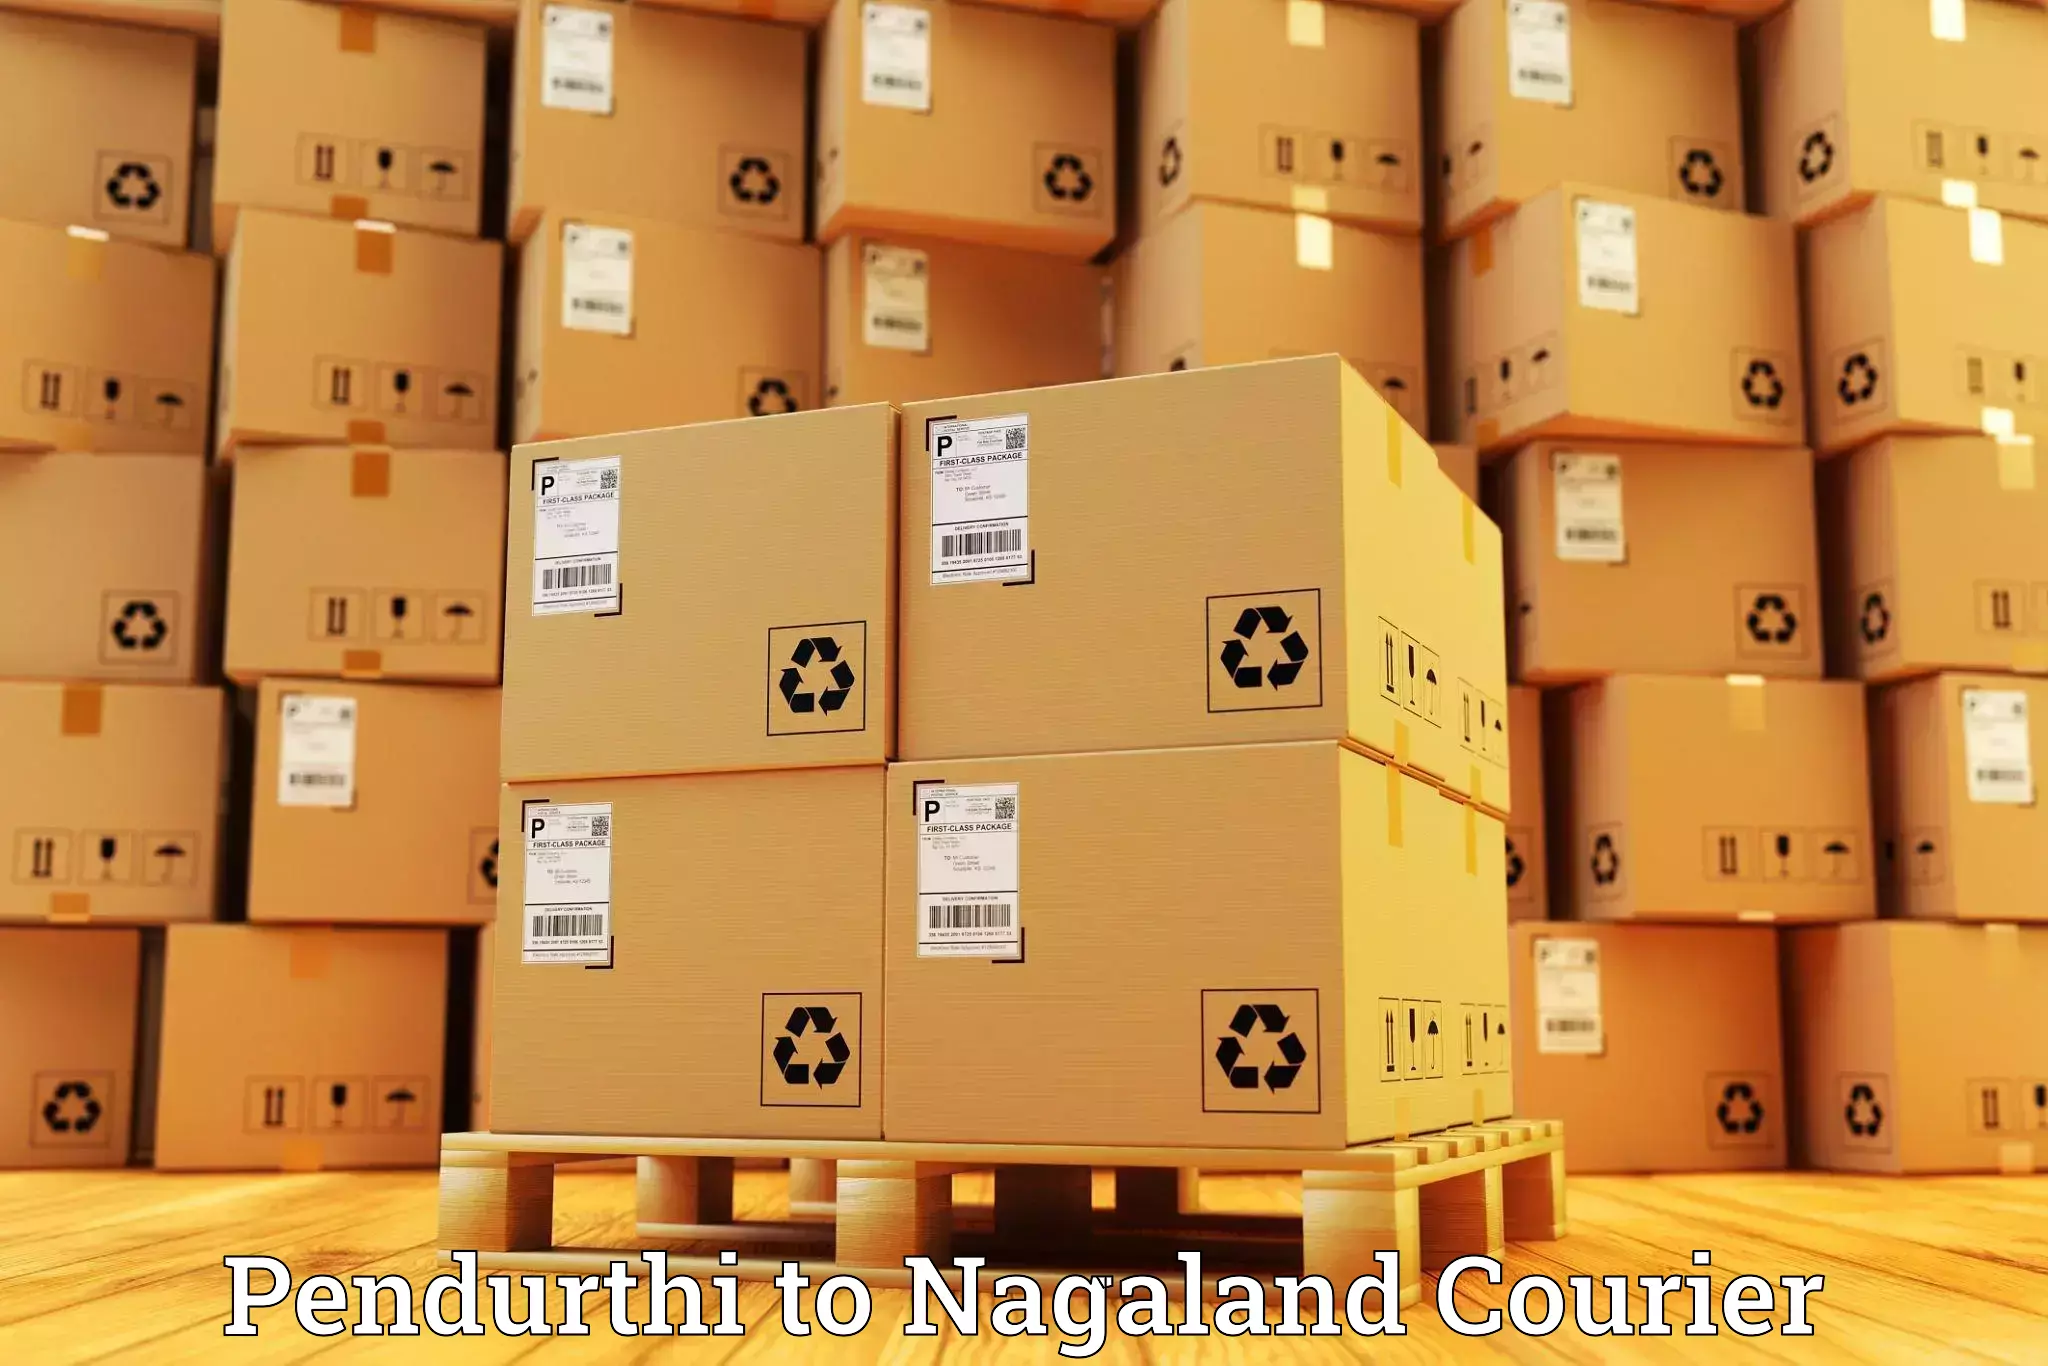 Package delivery network Pendurthi to NIT Nagaland